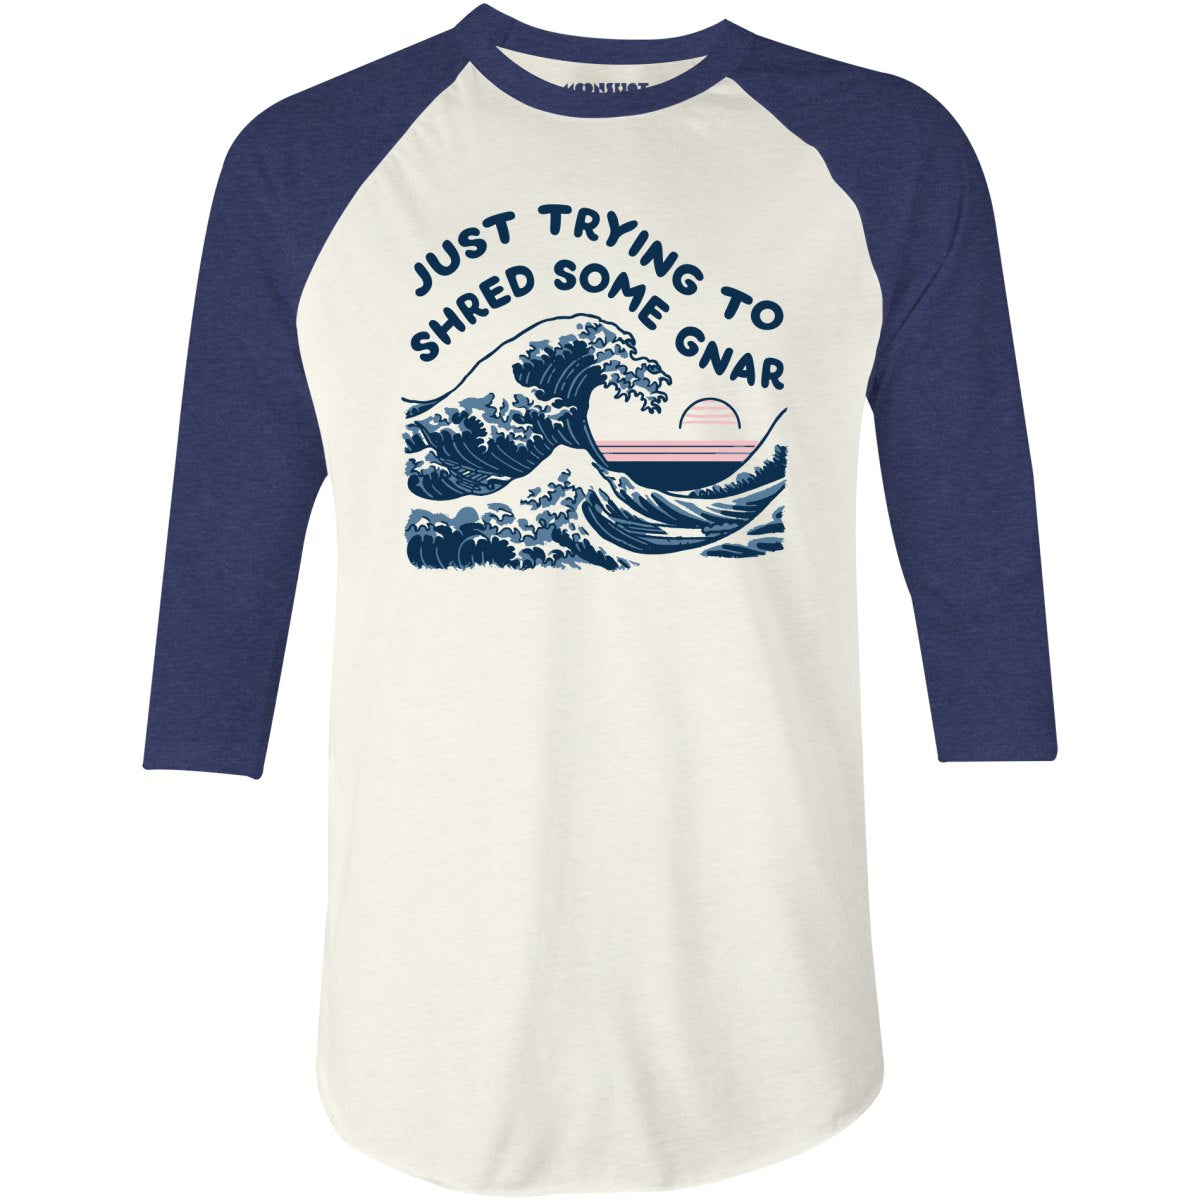 Just Trying to Shred Some Gnar - 3/4 Sleeve Raglan T-Shirt